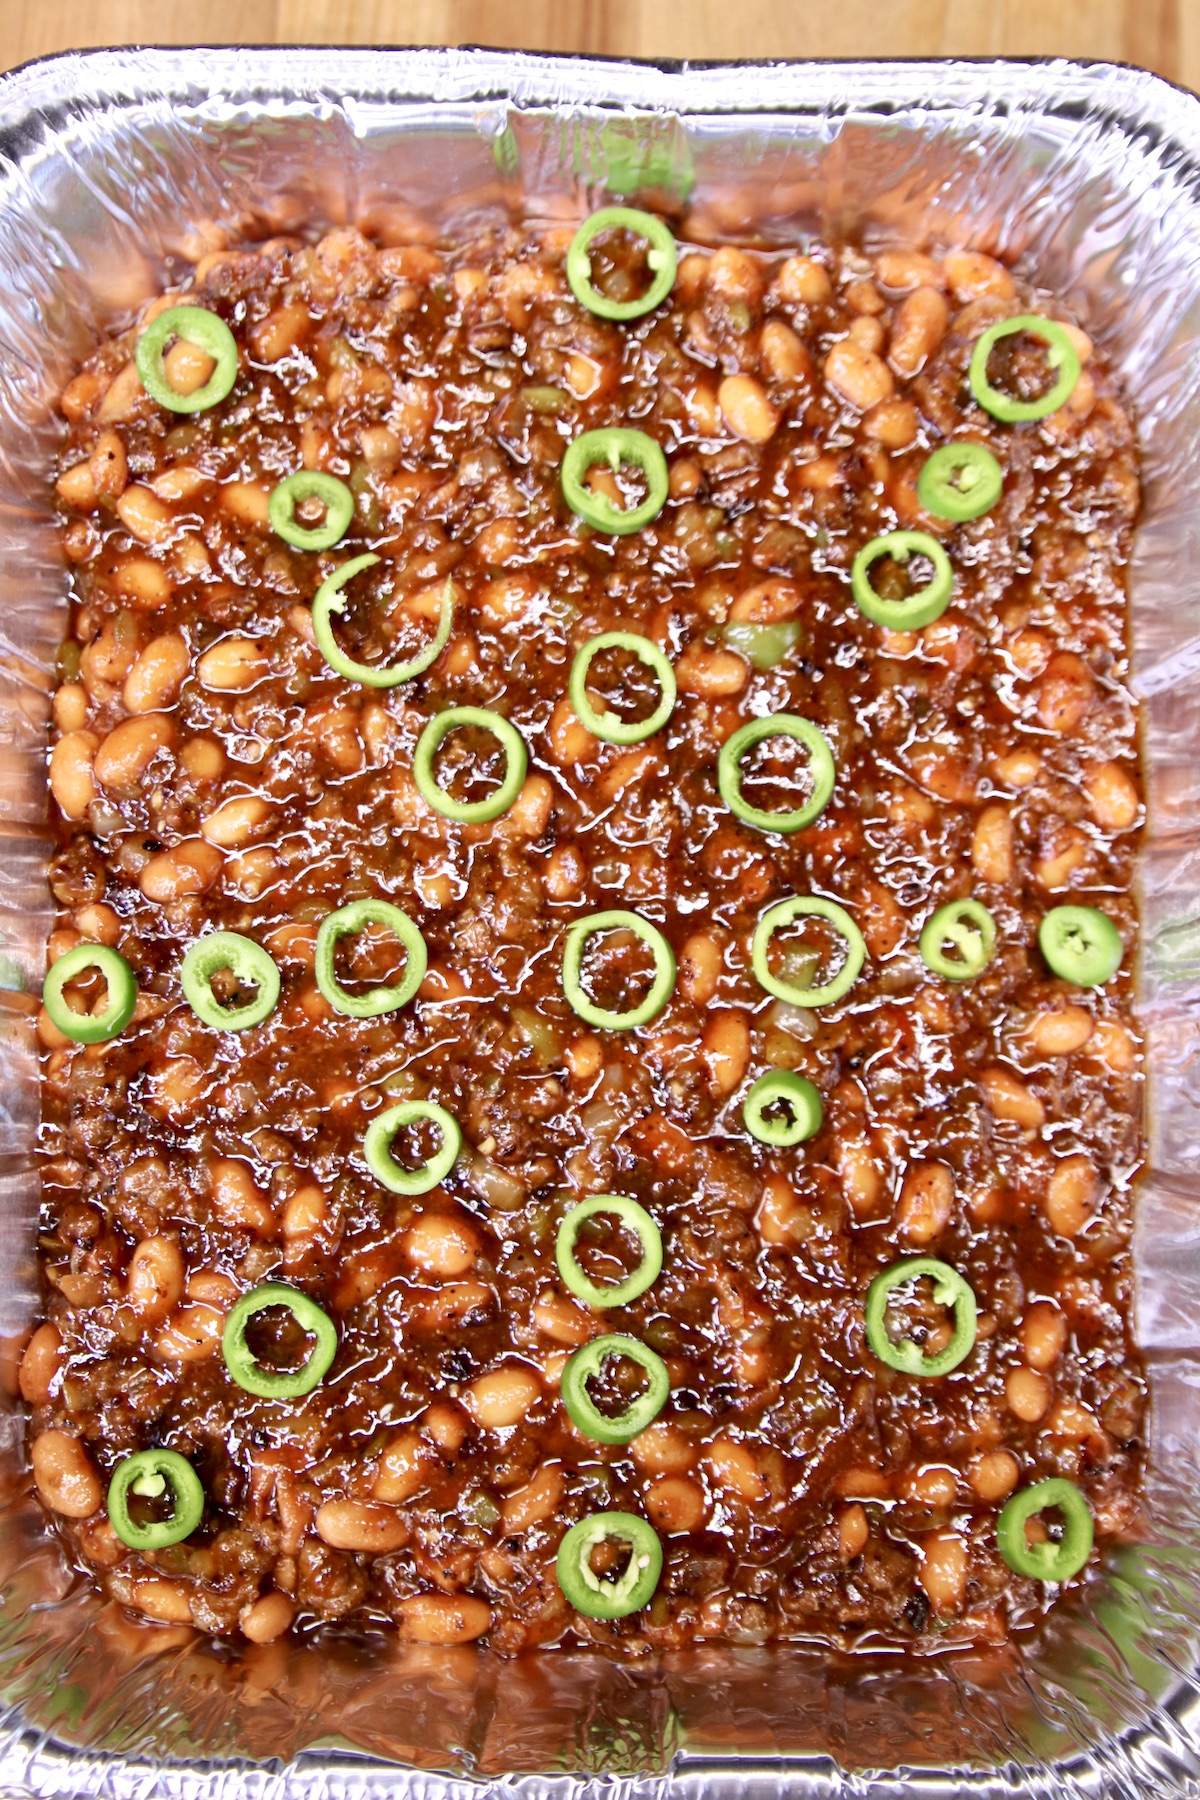 Cowboy beans with jalapeno slices in a foil pan.